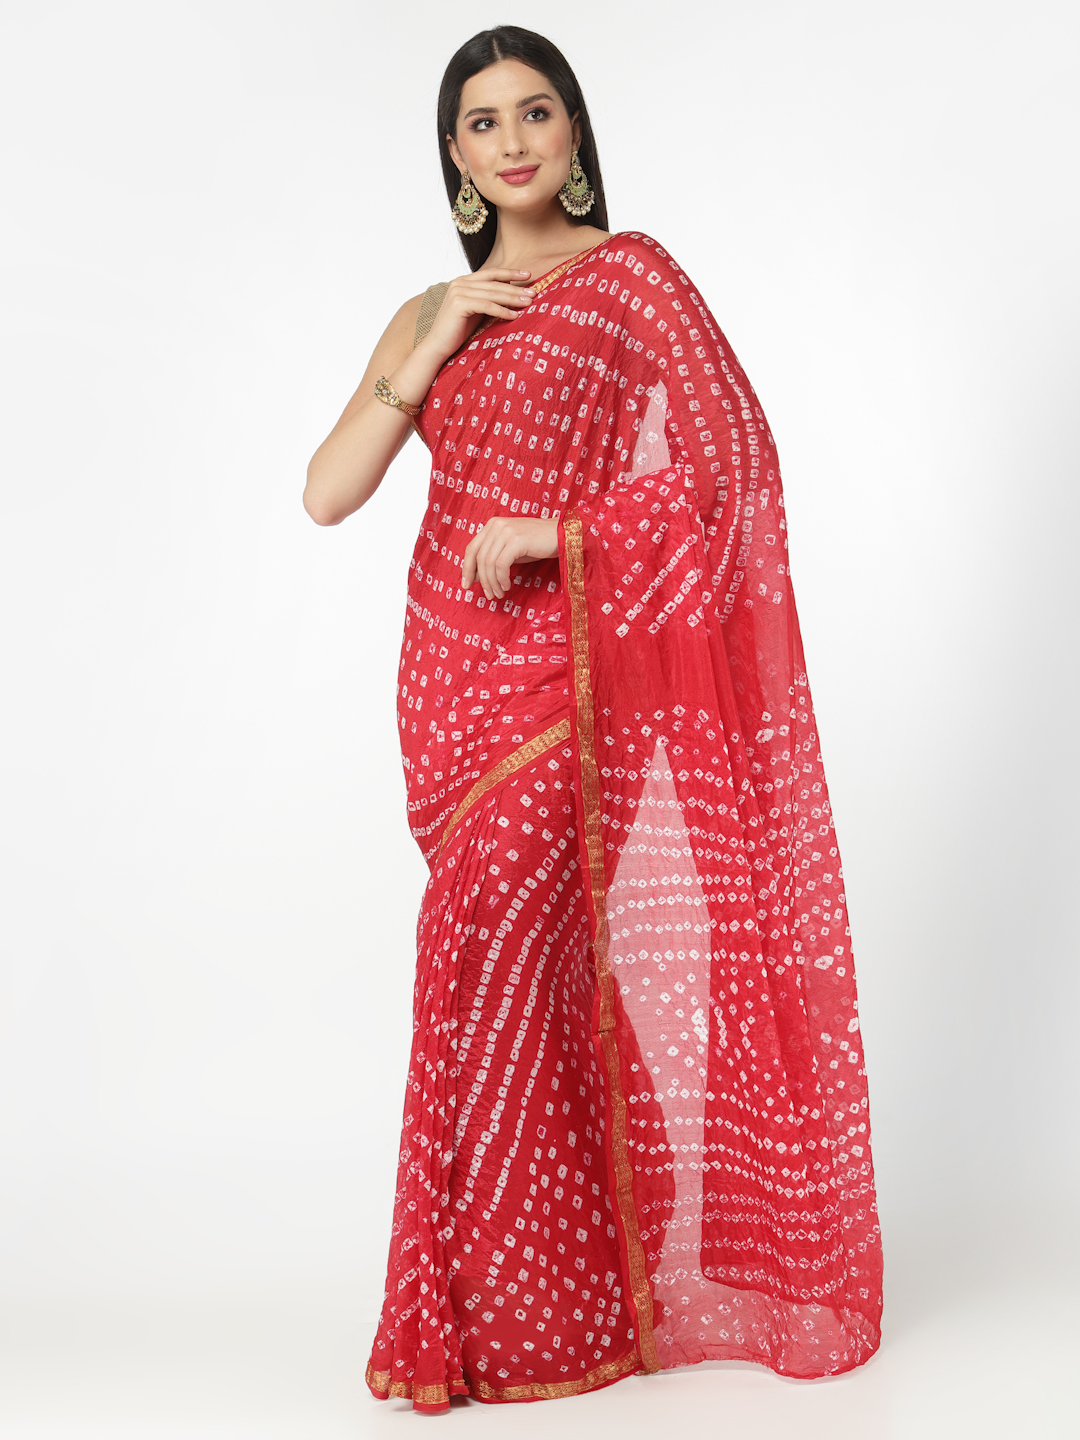 Women Silk Bandhani and Zari Weaving Saree with Unstitched Blouse - Pink And Red